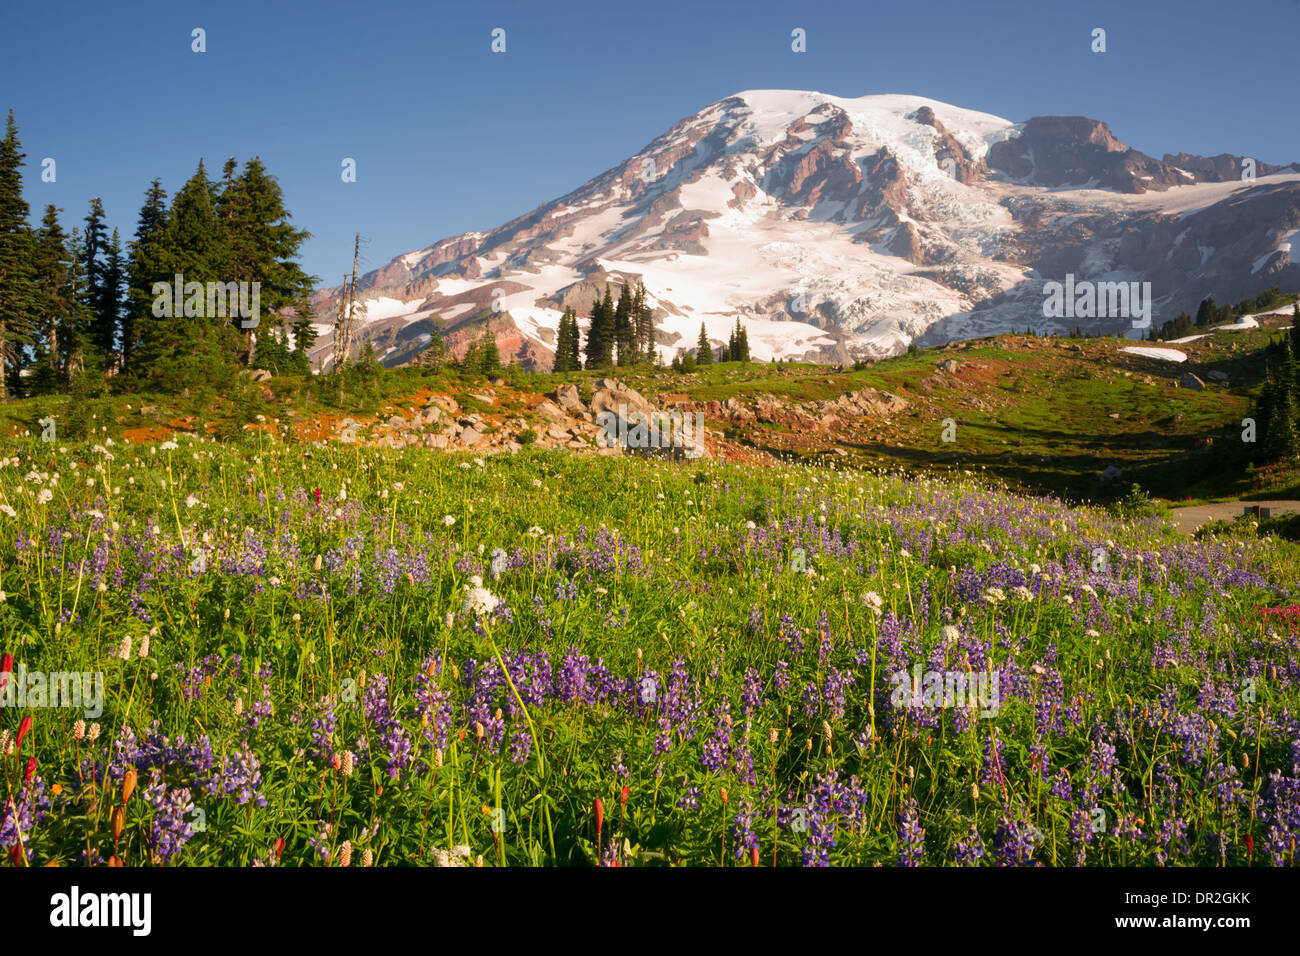 A dramatica and colorful view of Mt. Rainier with wildflowers in full bloom Stock Photo